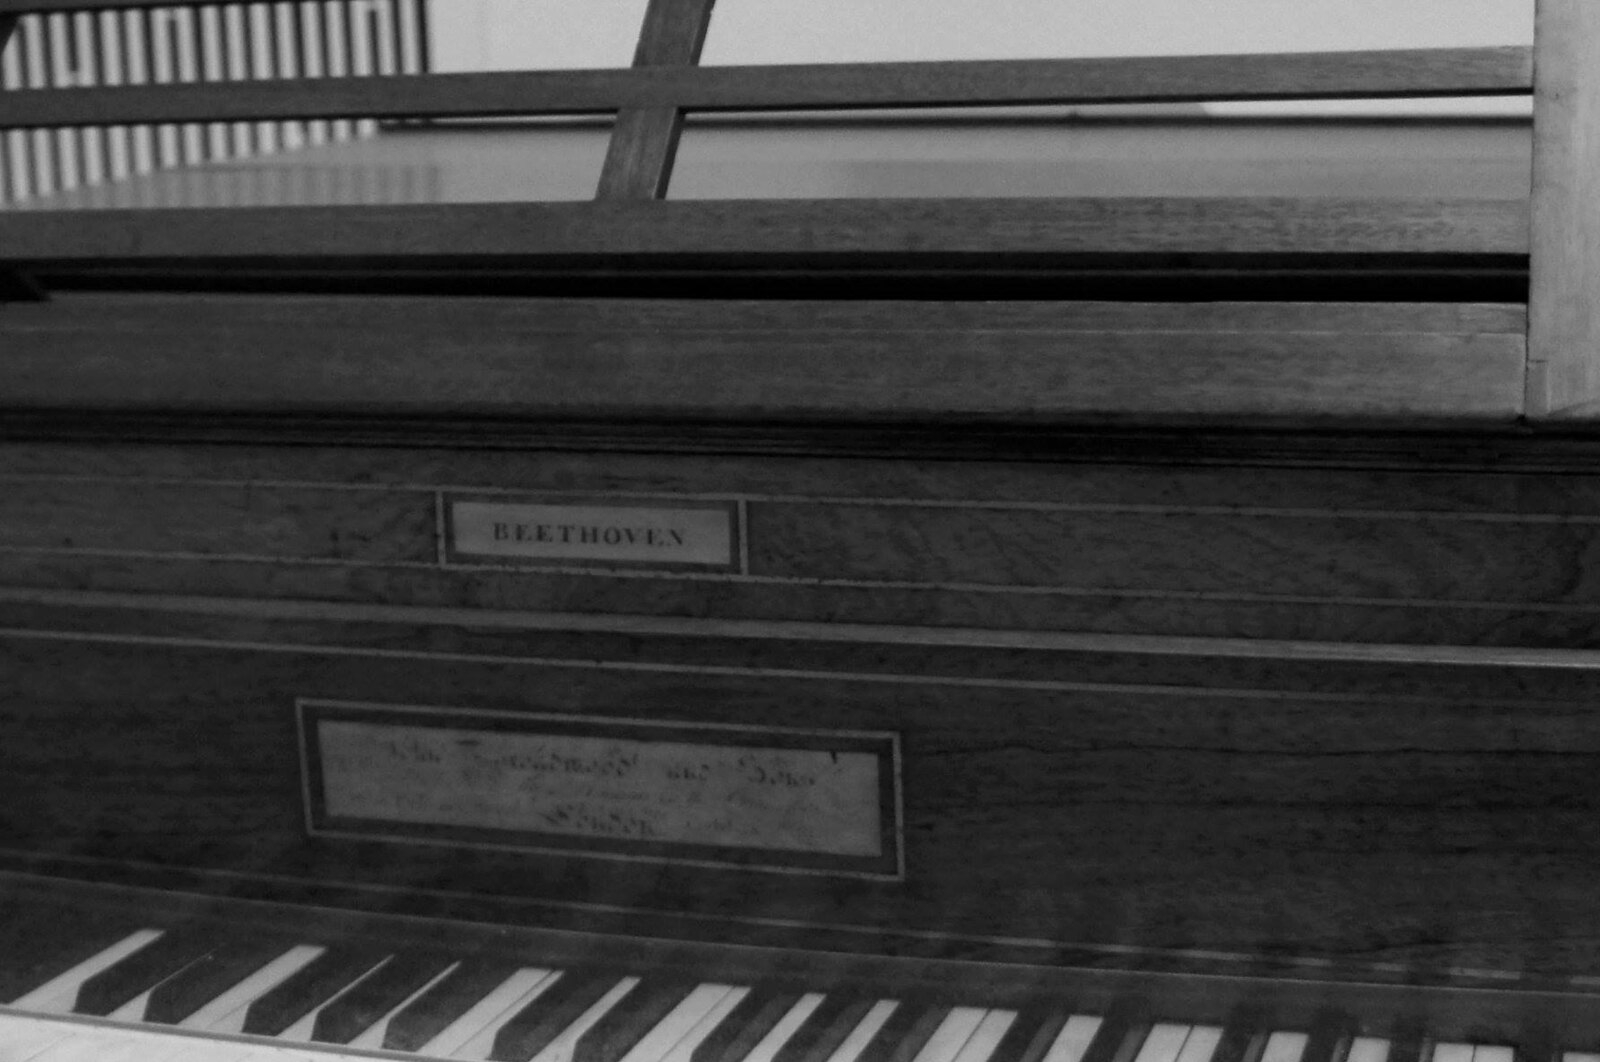 Hungarian National Museum: piano which belonged to both Beethoven and Liszt